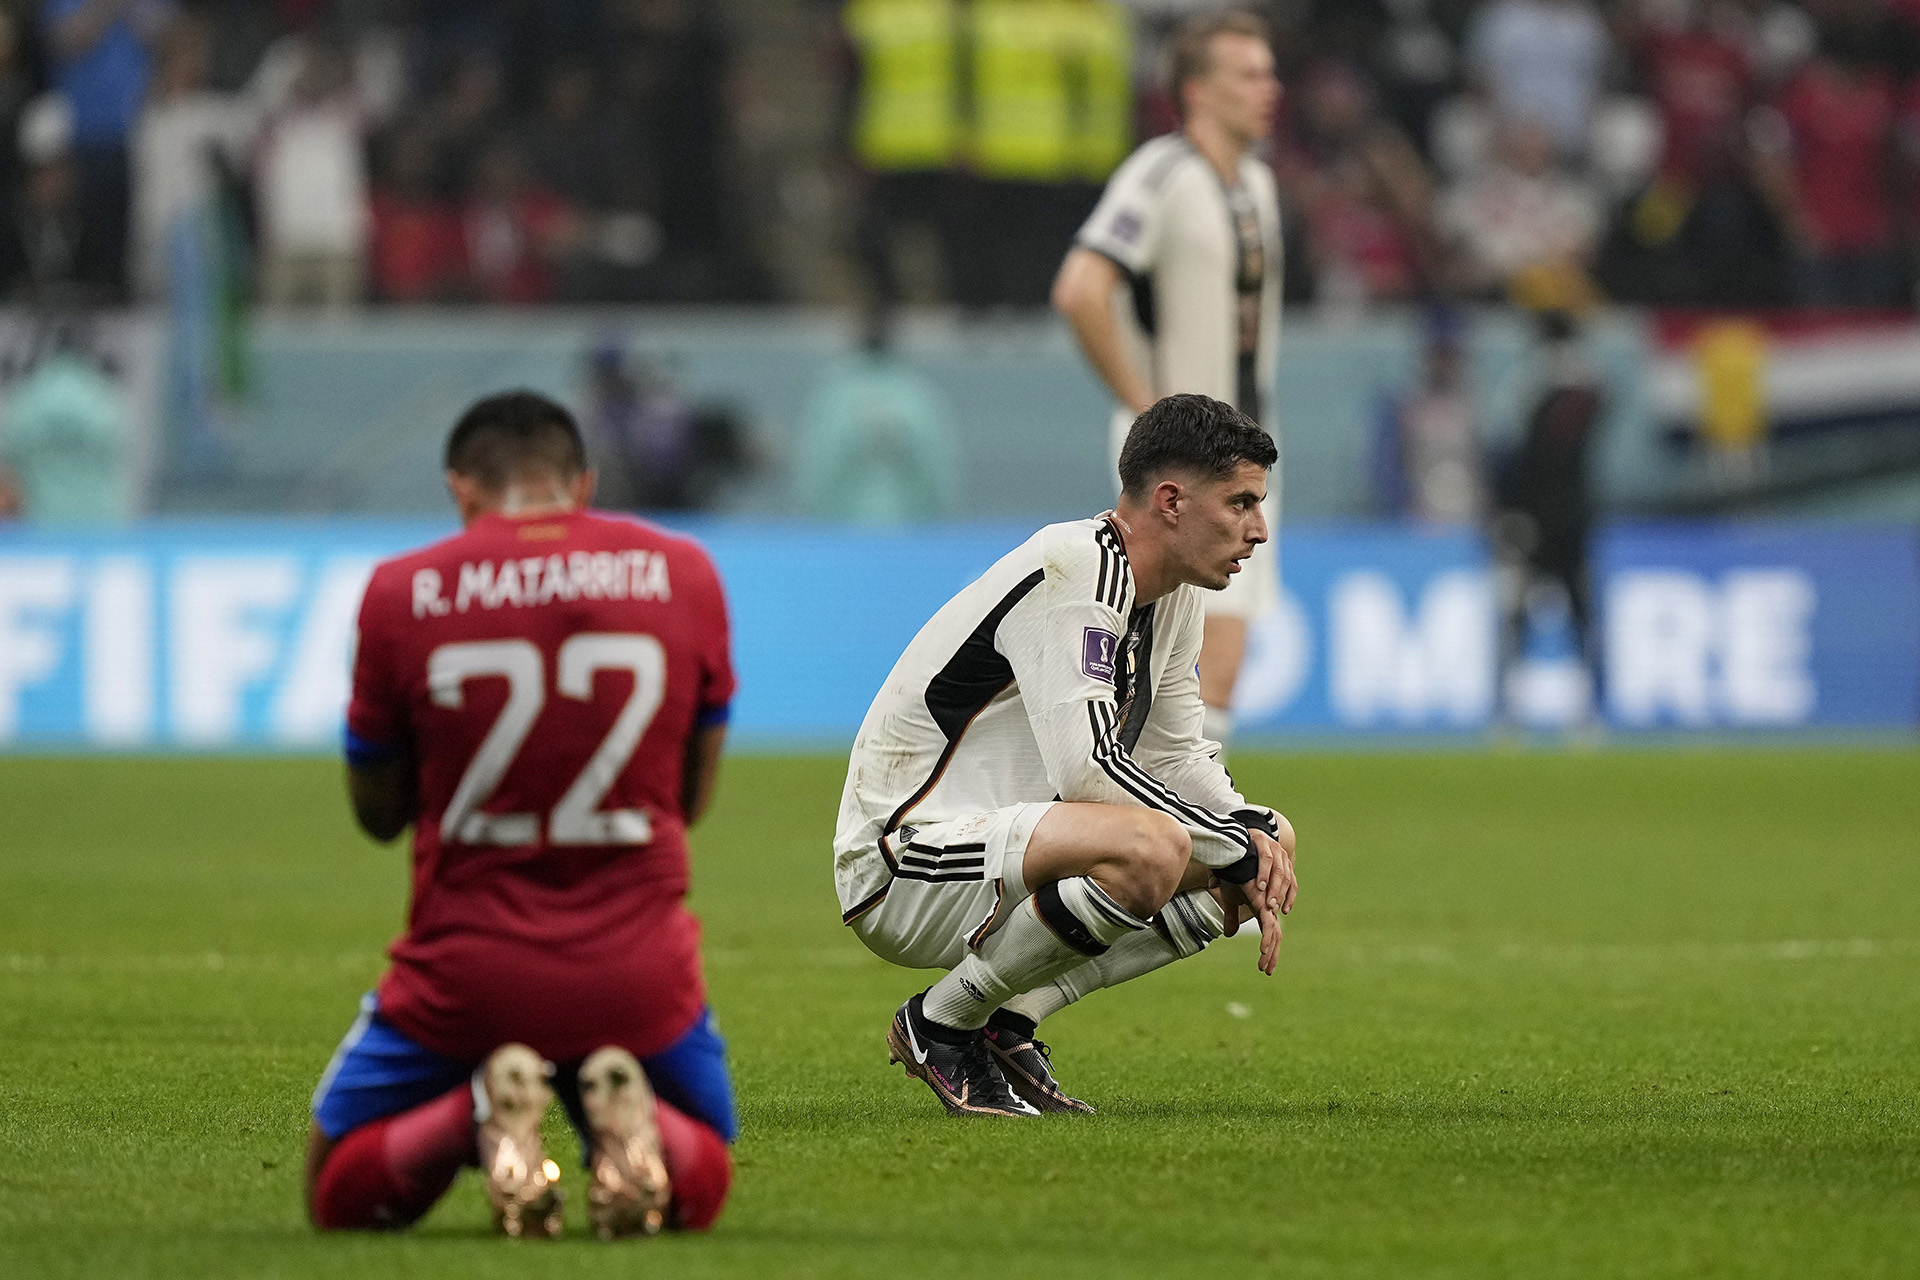 Germany's Kai Havertz, centre, reacts after the World Cup group E soccer match between Costa Rica and Germany at the Al Bayt Stadium in Al Khor , Qatar, Thursday, Dec. 1, 2022. (AP Photo/Martin Meissner)